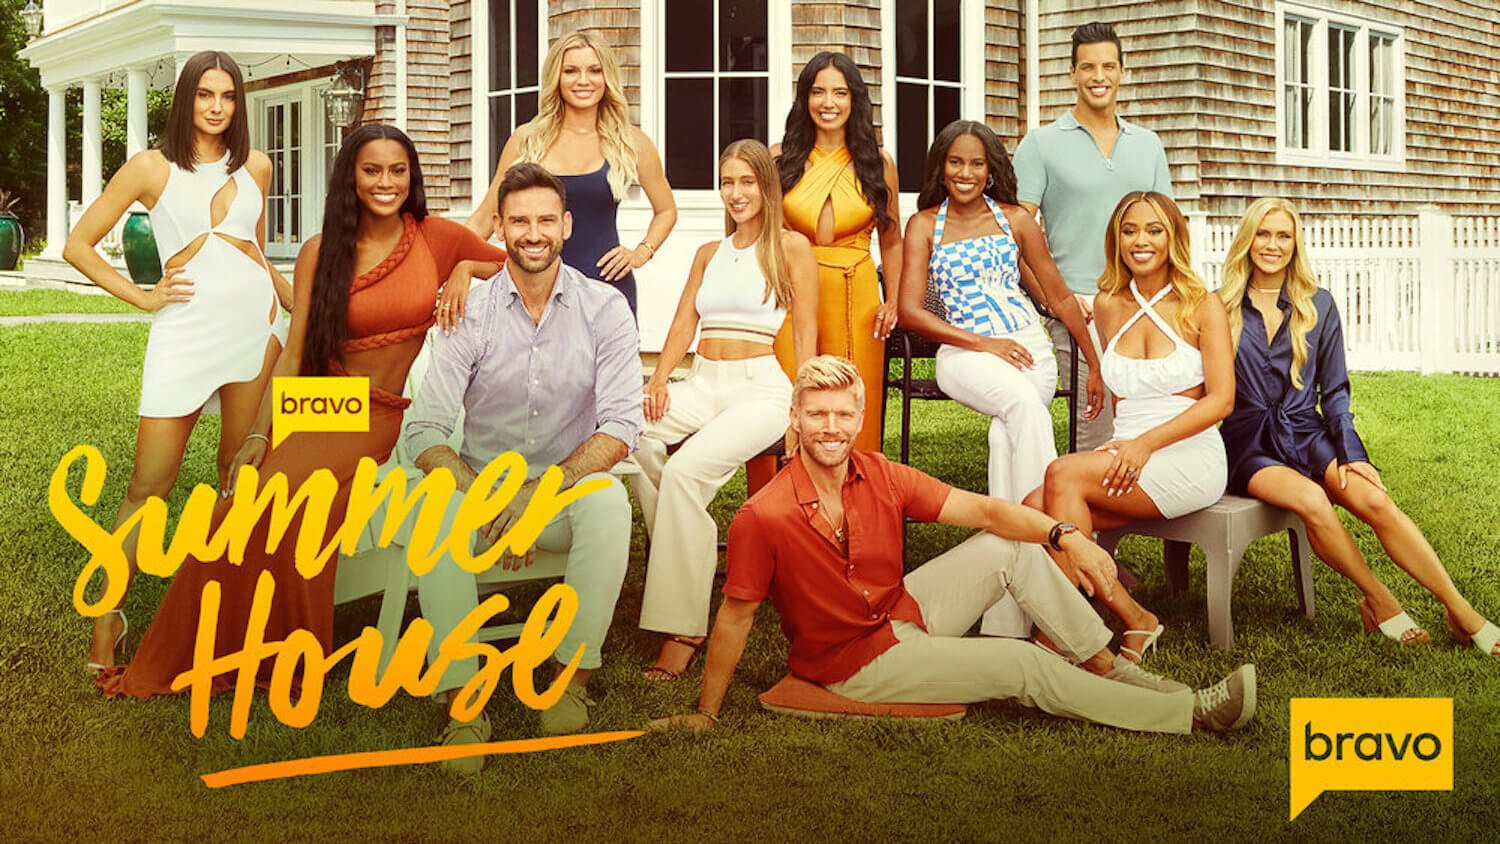 'Summer House' star May and boyfriend Oliver break up. In the photo, the 'Summer House' stands in front of their rental with the logo of the show to the left.